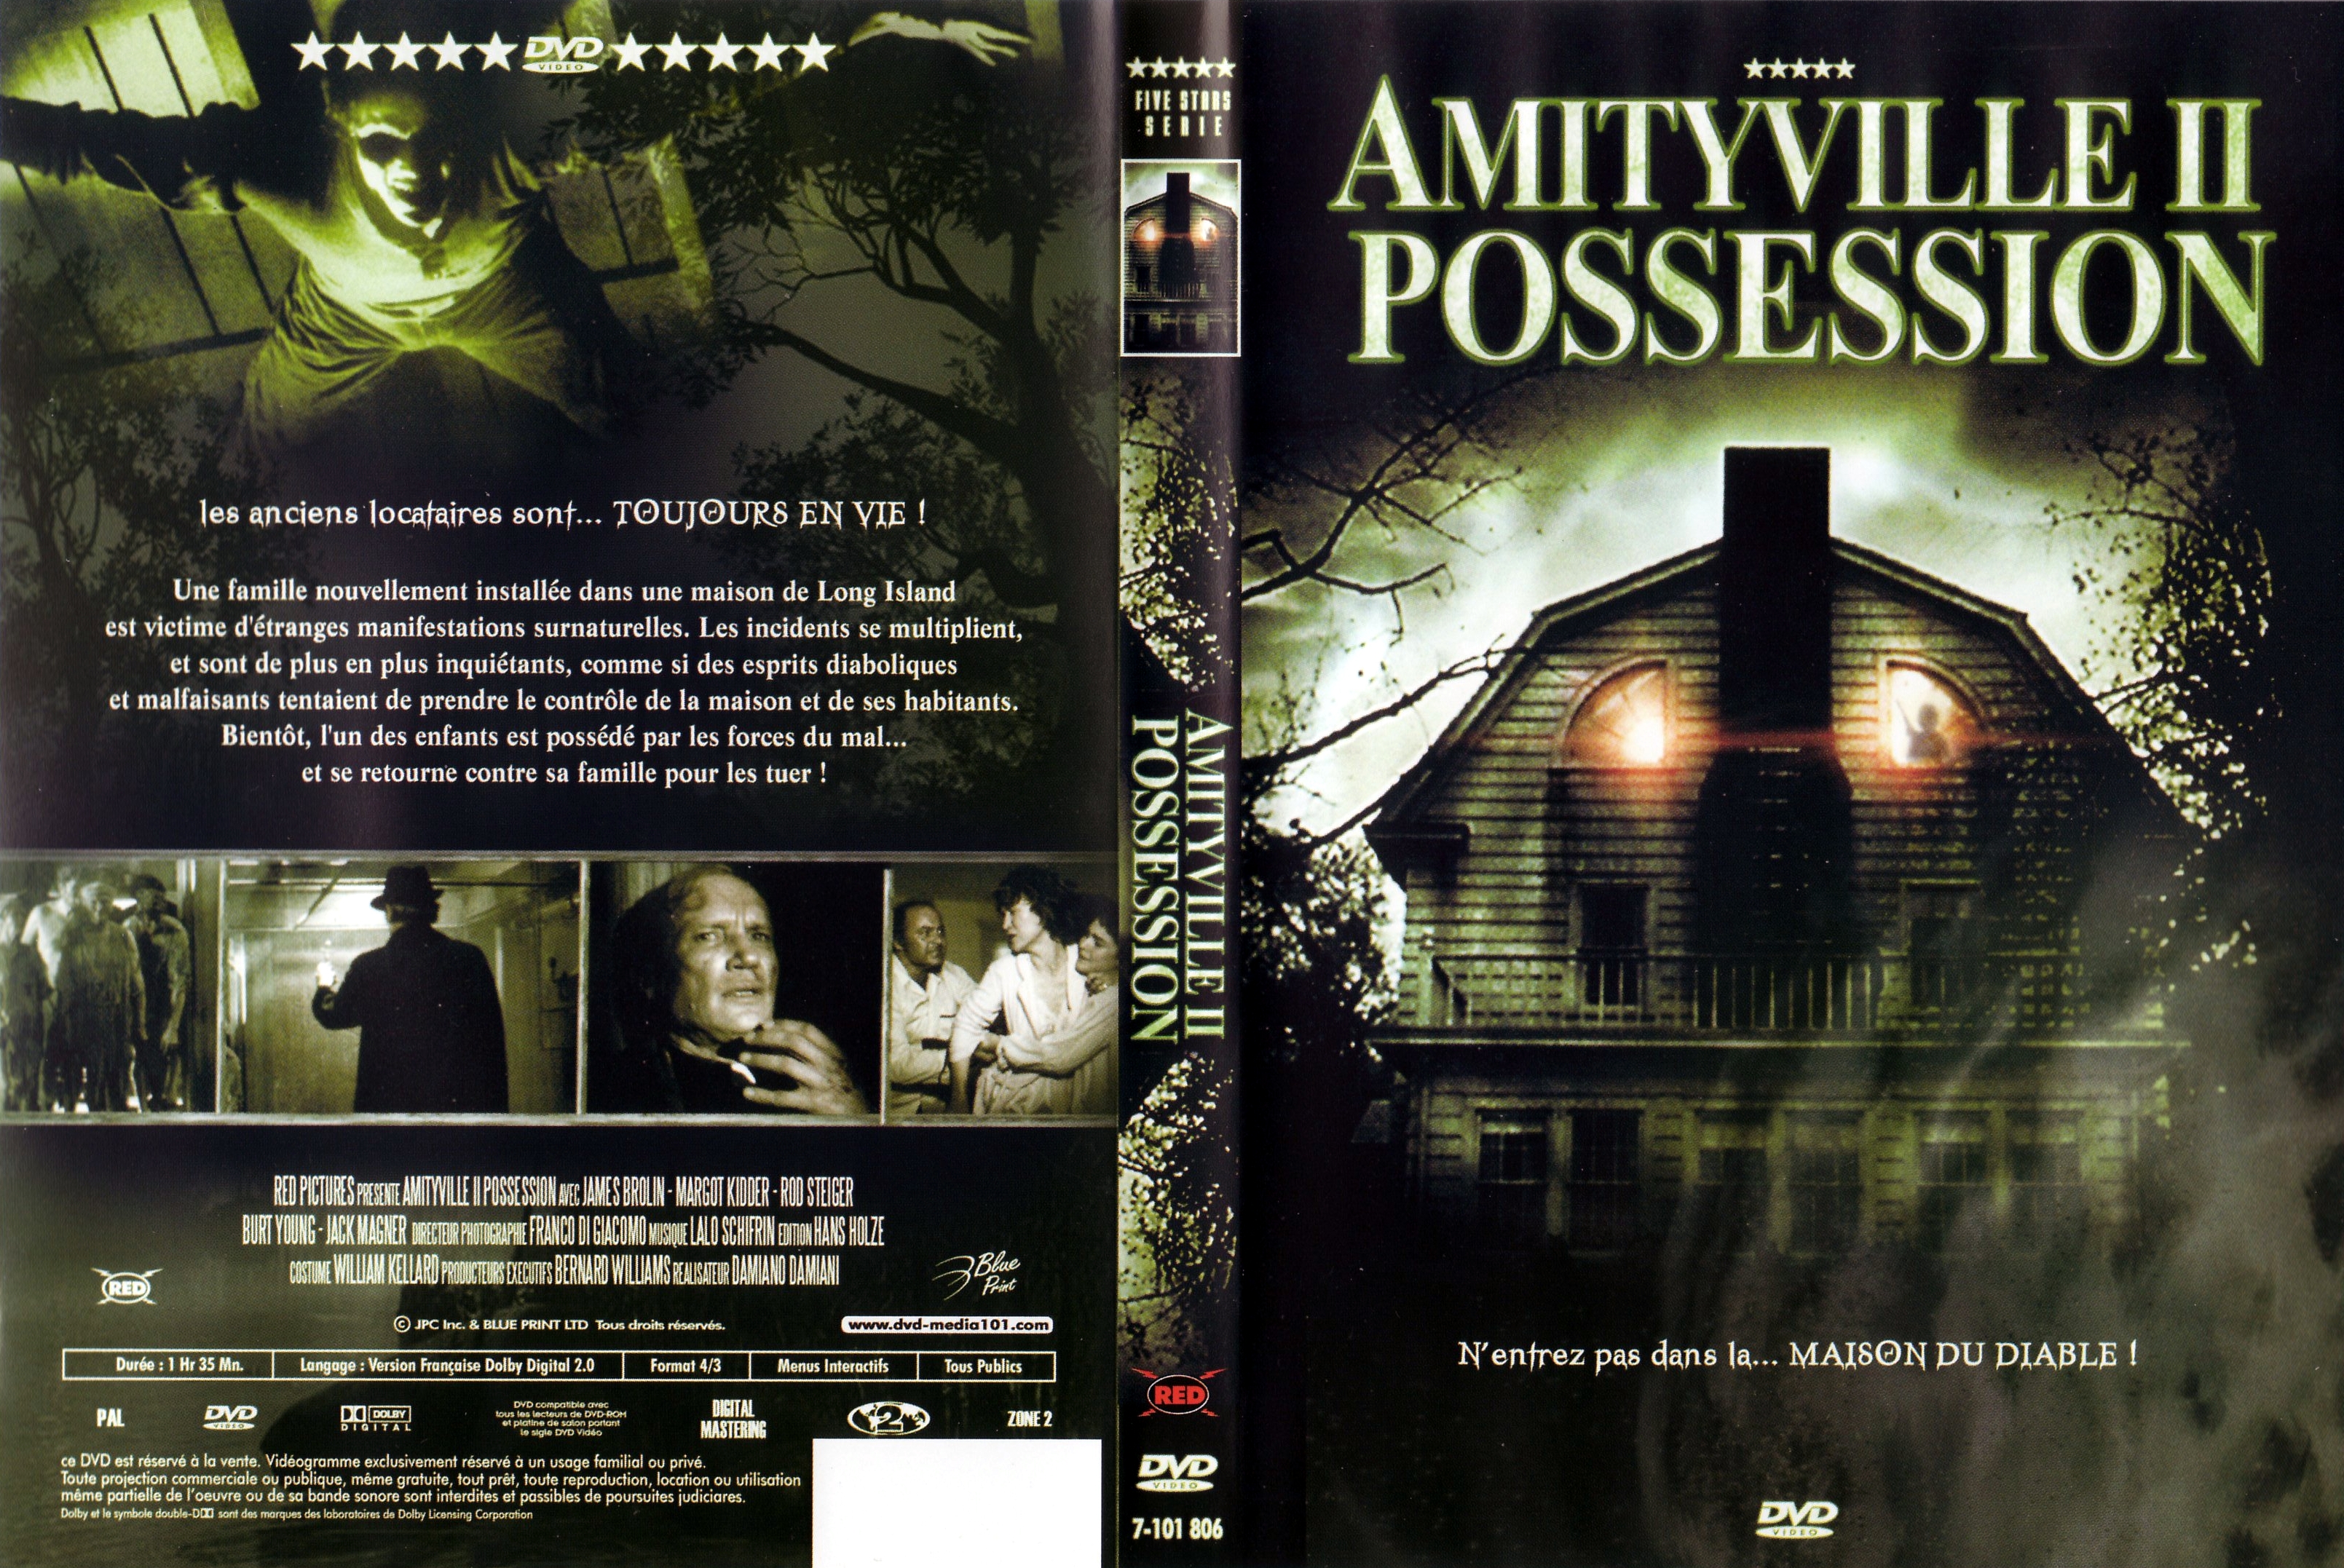 Jaquette DVD Amityville 2 v4